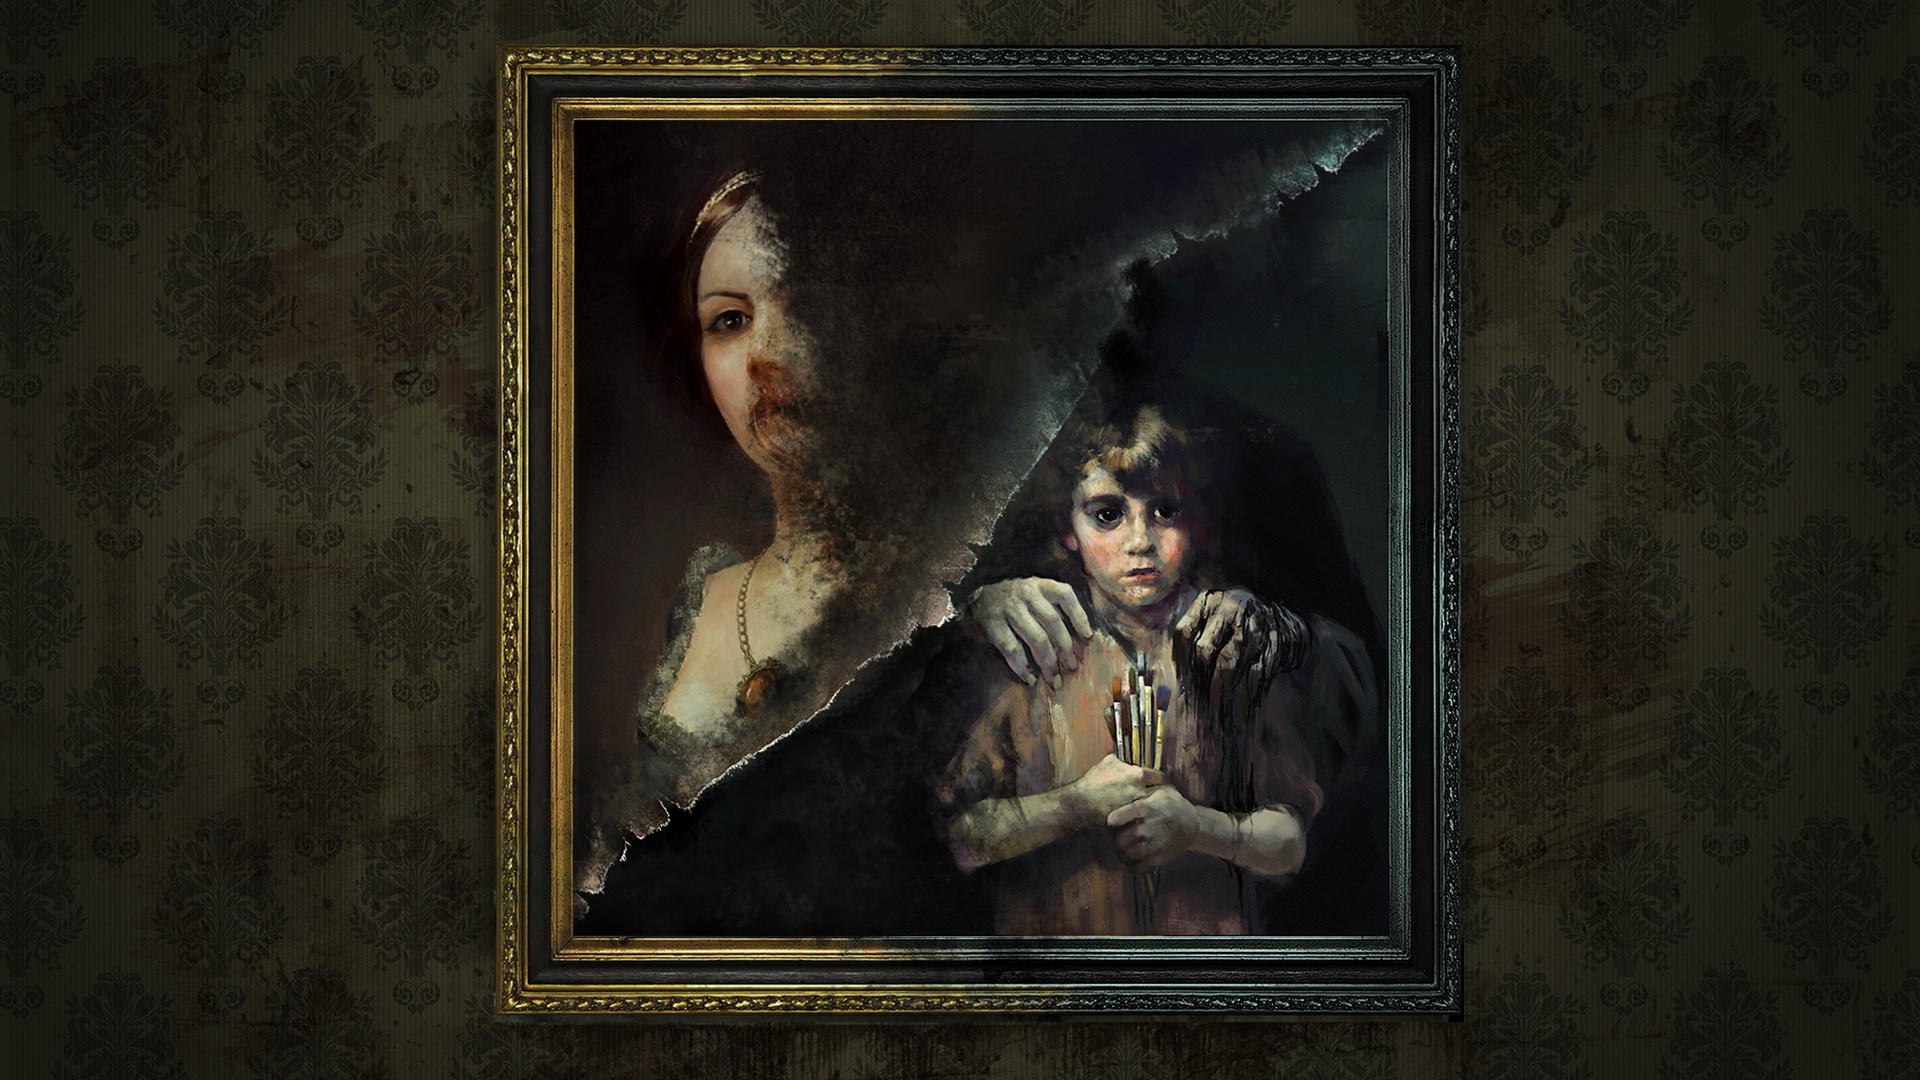 Layers of Fear releases on June 15th